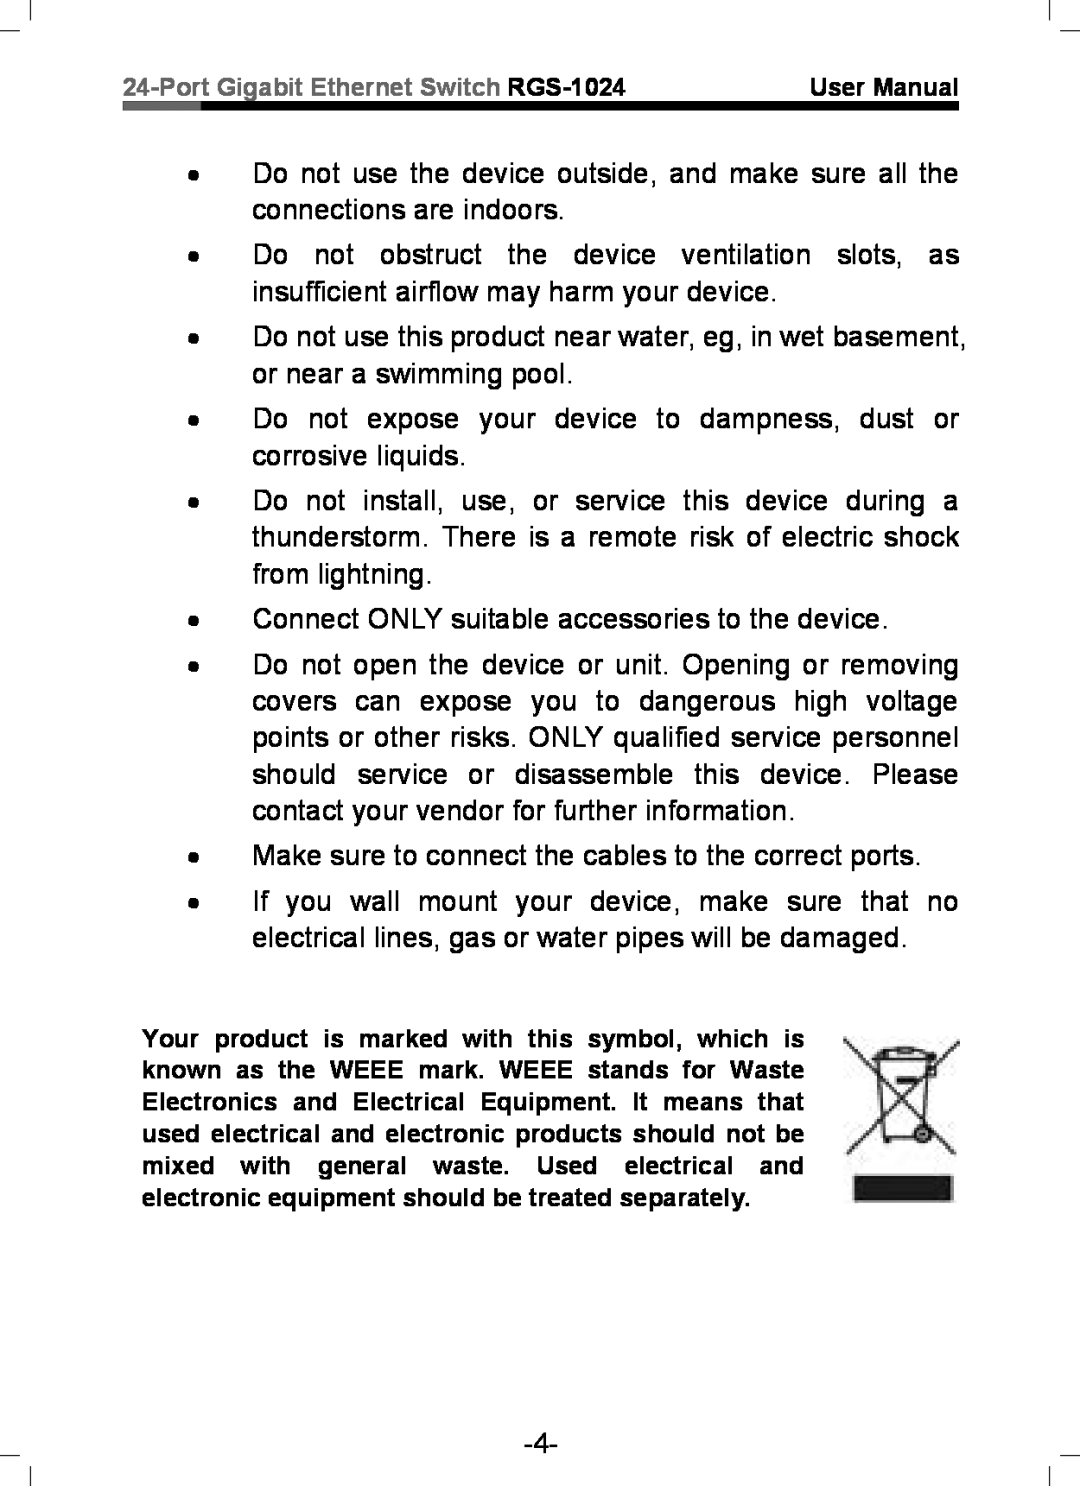 Rosewill RGS-1024 user manual Do not expose your device to dampness, dust or corrosive liquids 